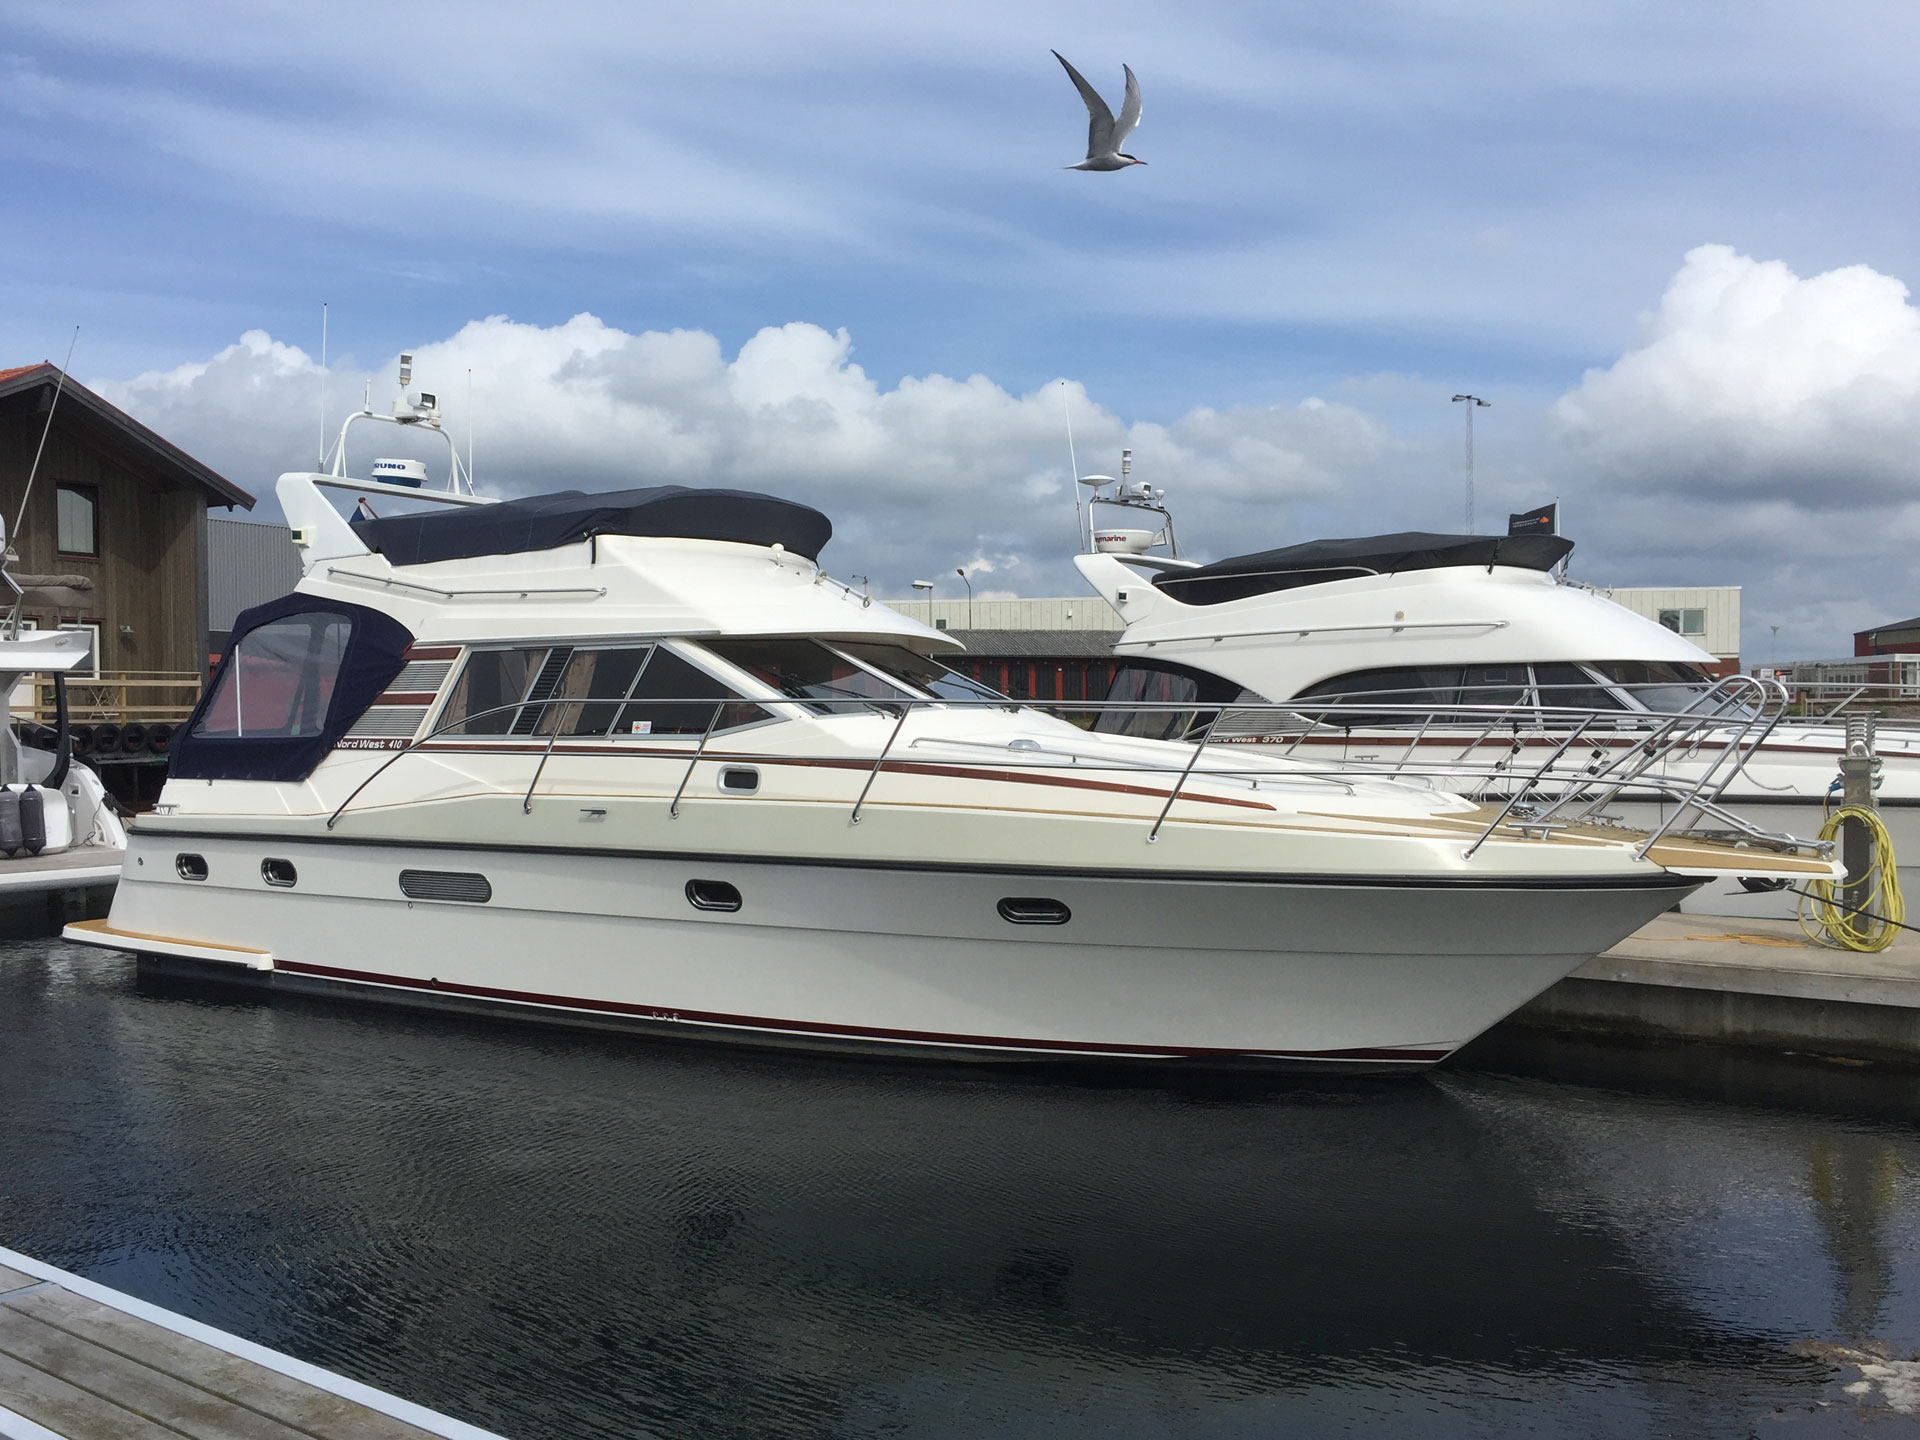 Nord West 410 Flybridge #20 now available for viewing